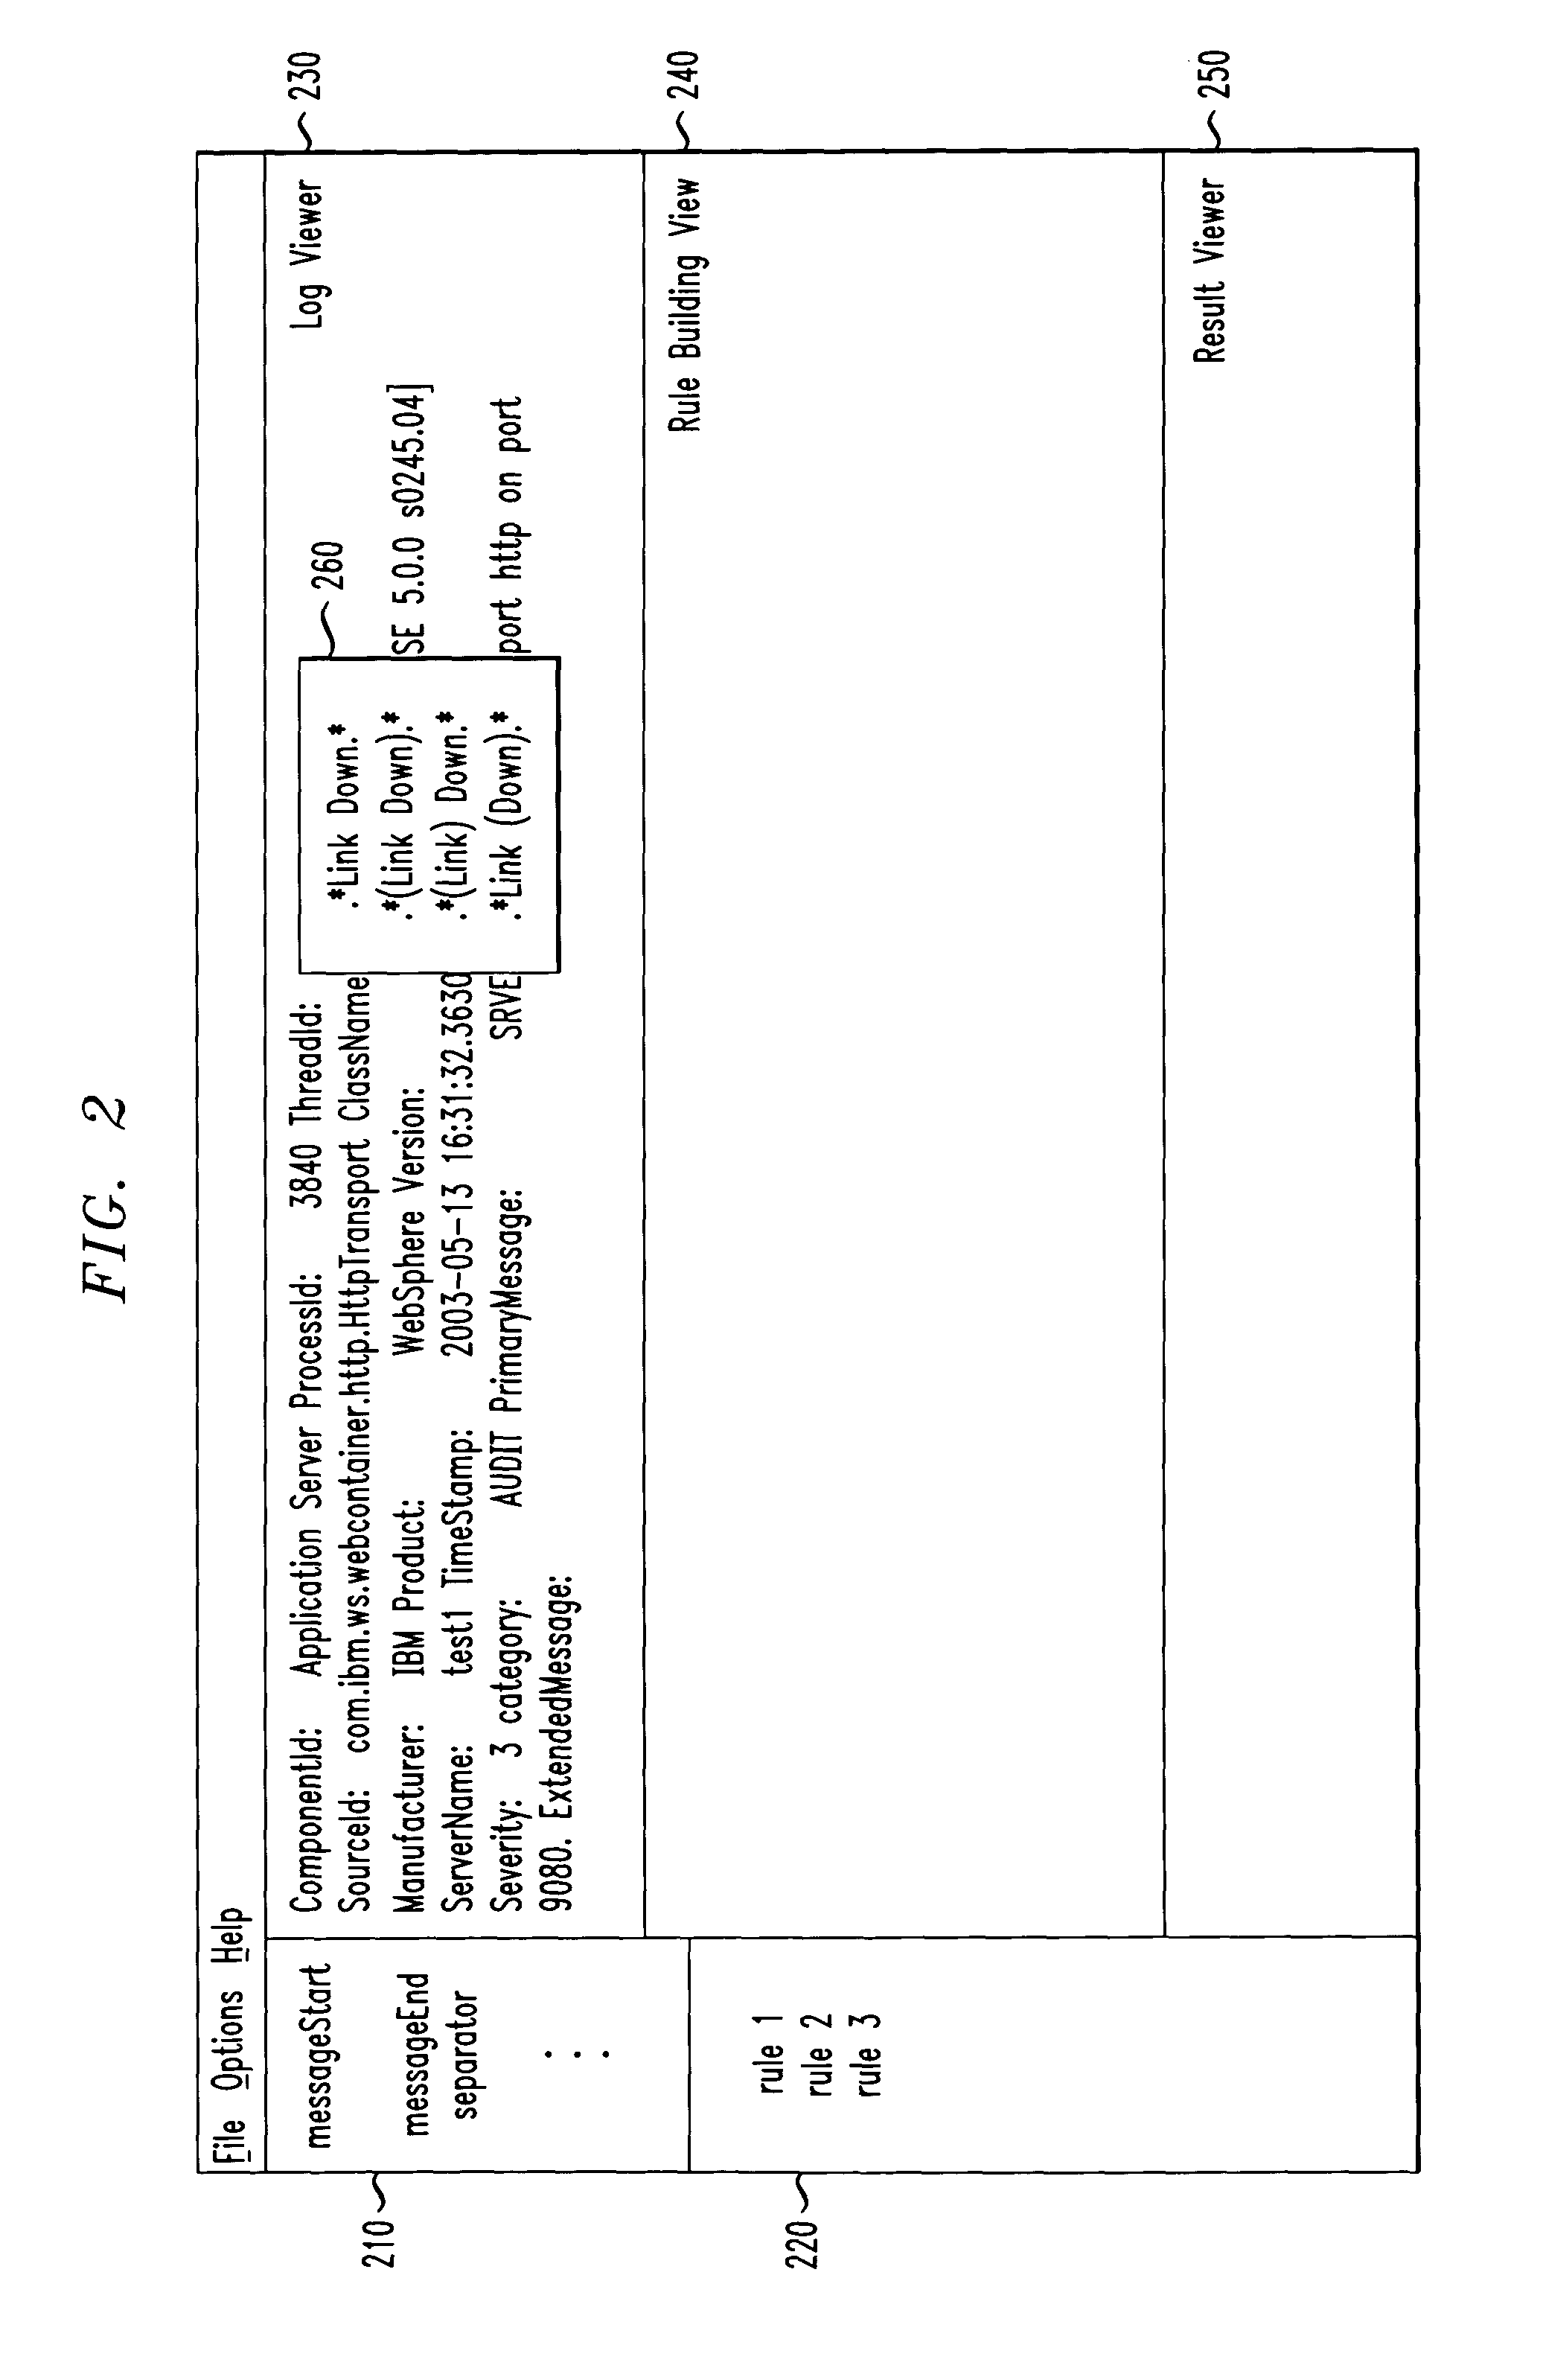 Methods and apparatus for creation of parsing rules